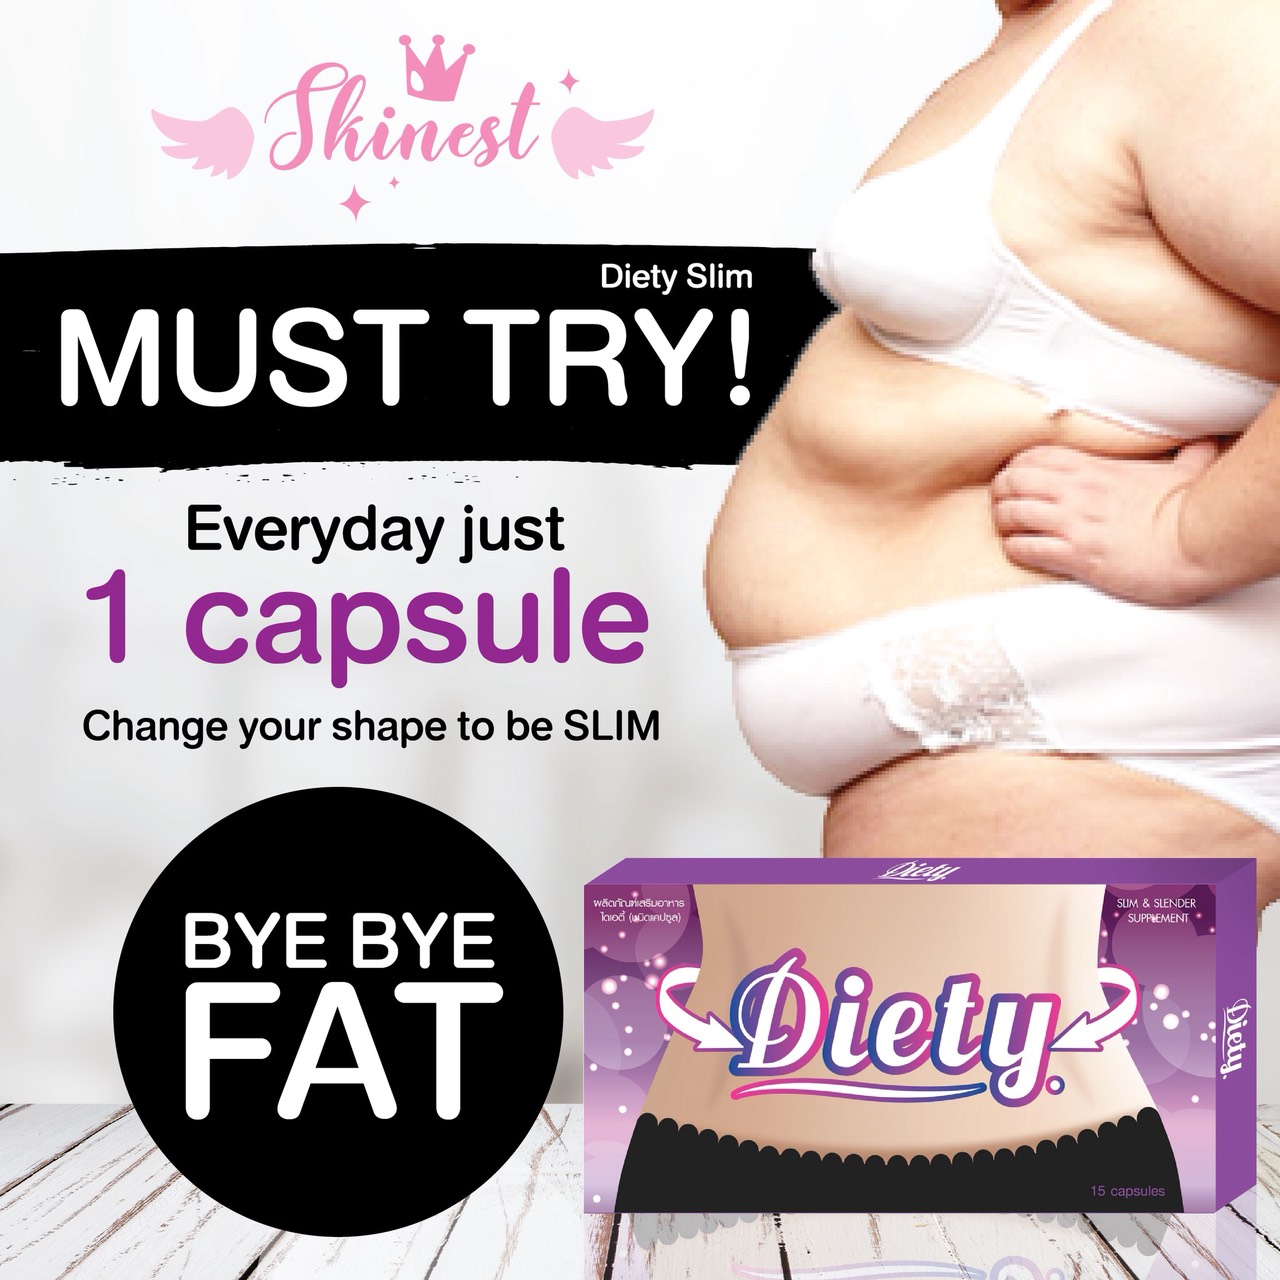 15 CAPS DIETY (GLUTA LAPUNZEL) SLIM & SLENDER WHITENING SKIN DIETARY SUPPLEMENT WEIGHT LOSS SLIM AND FIT by www.ccthaitown.com